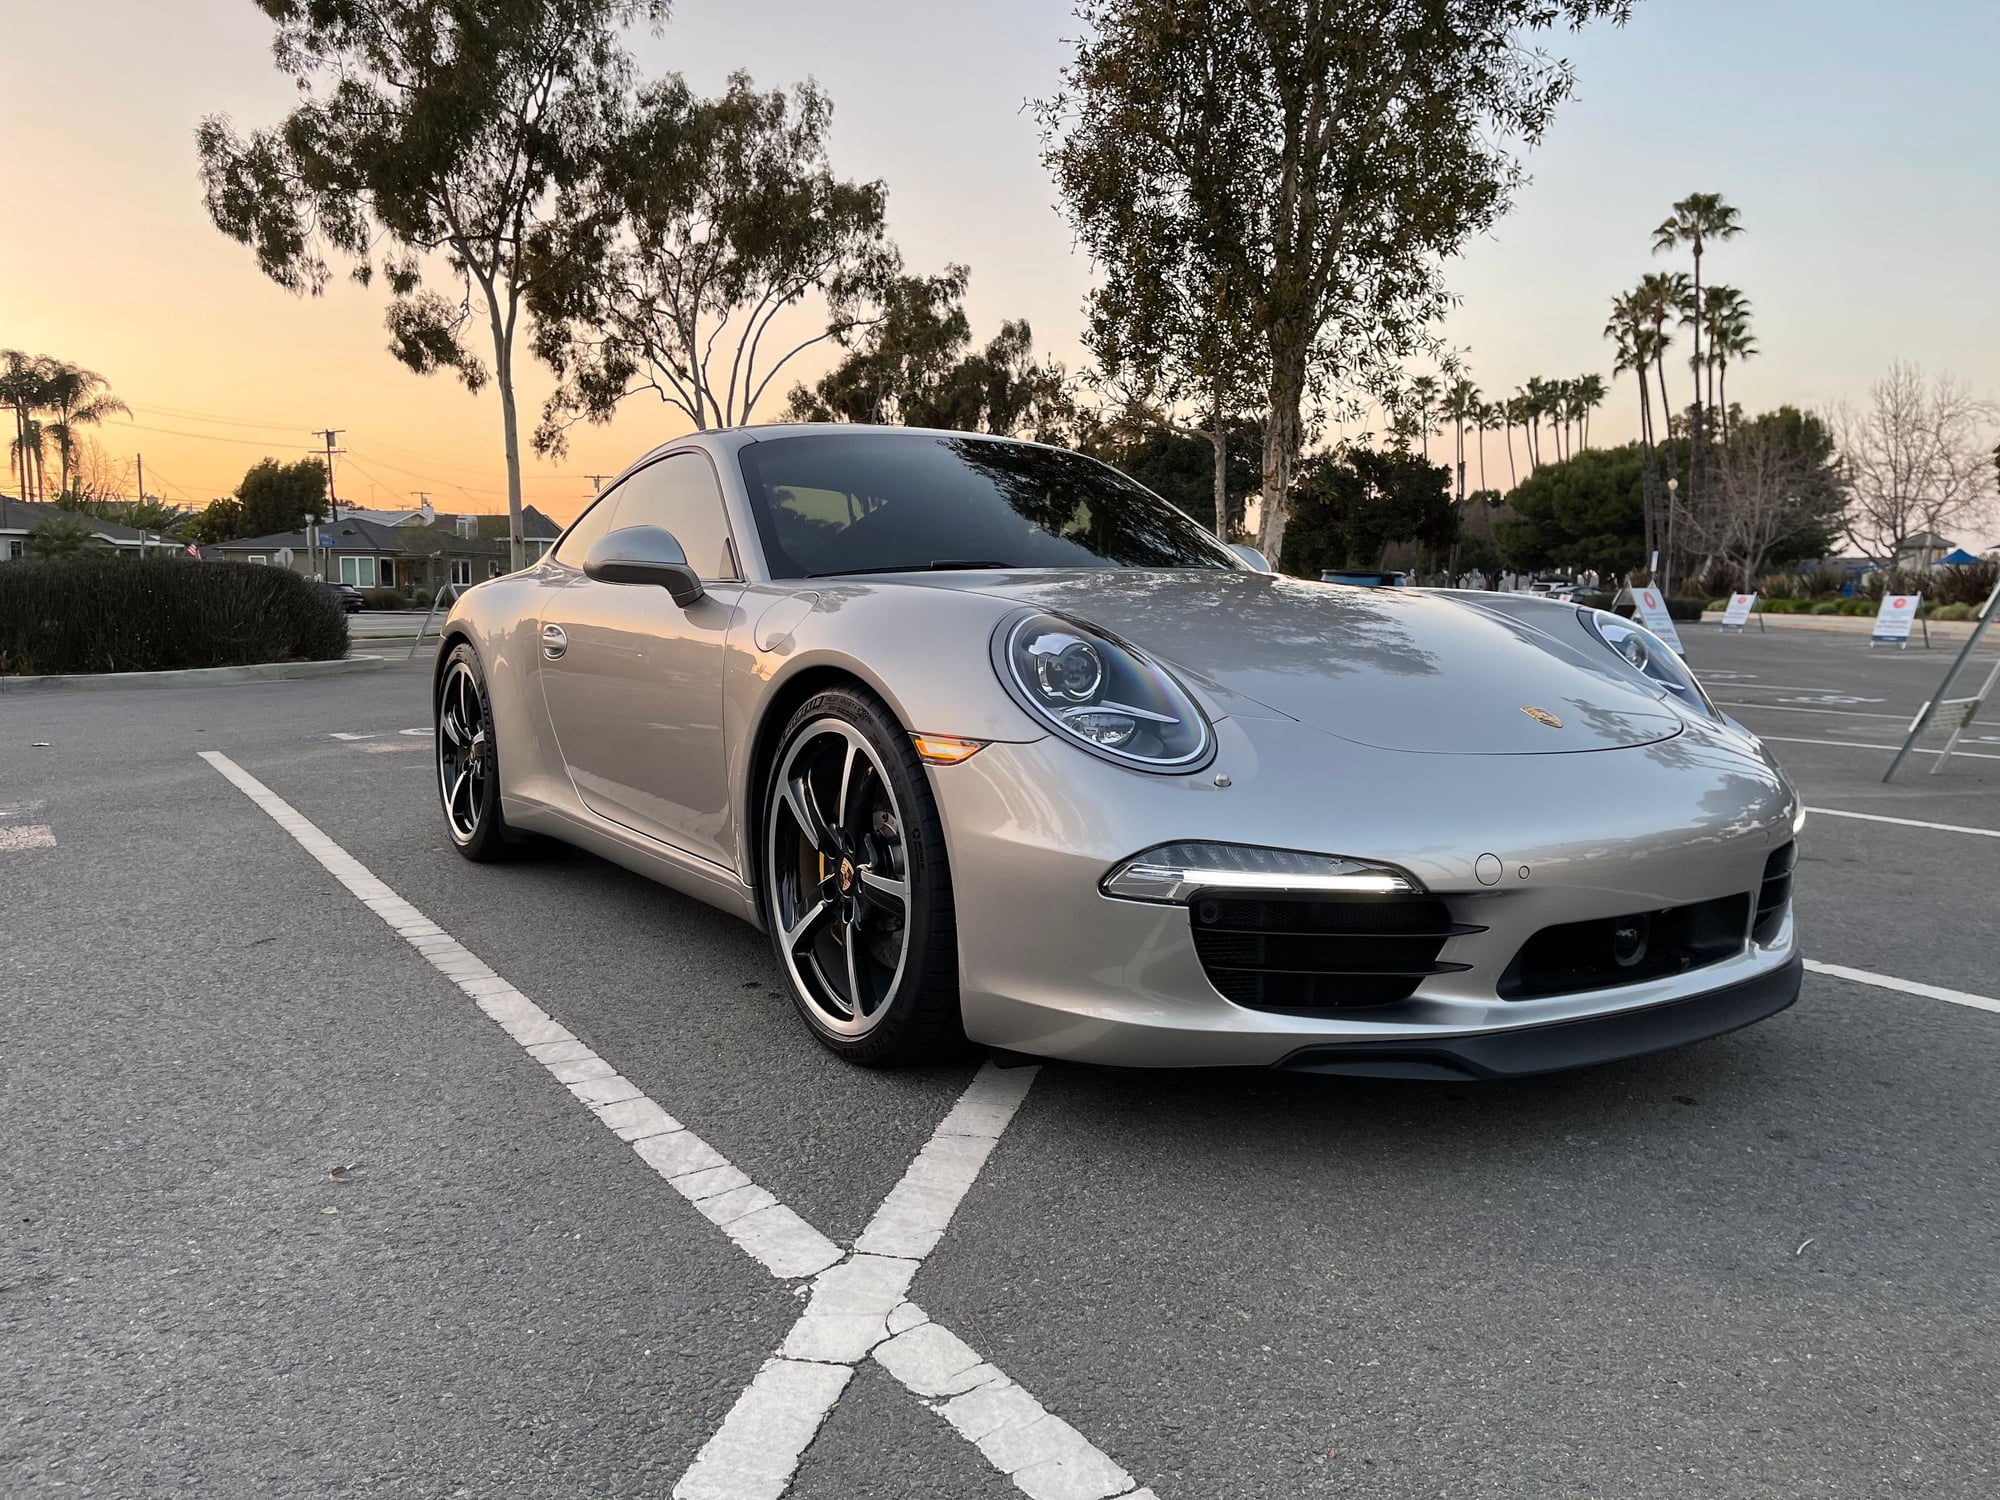 2013 Porsche 911 - 2013 911 C2S PDK PowerKit X51 PCCB Burmester Aerokit $158k MSRP 28k miles - Used - VIN WP0AB2A91DS121363 - 28,000 Miles - 6 cyl - 2WD - Automatic - Coupe - Silver - Seal Beach, CA 90740, United States